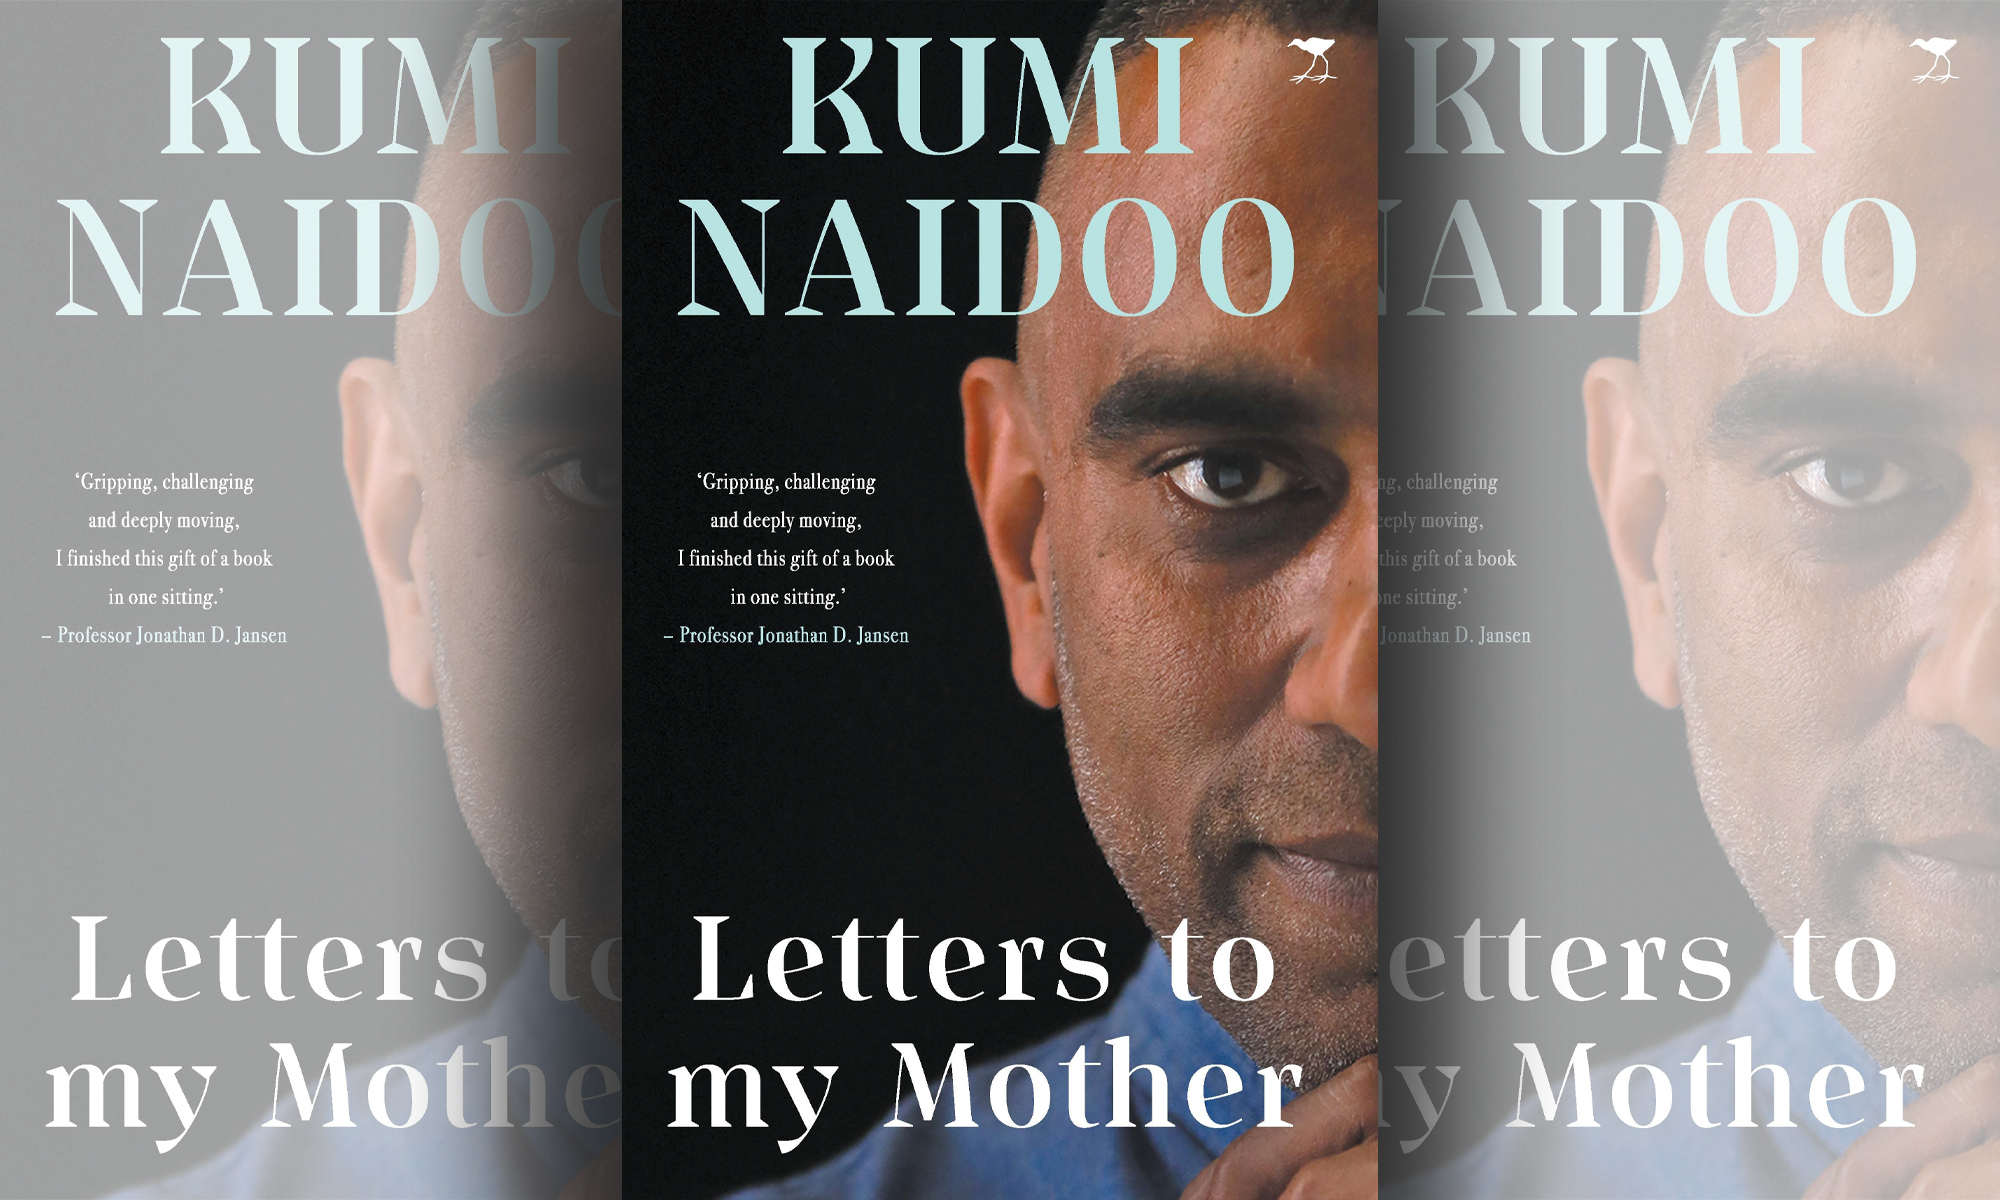 'Letters to my Mother – The Making of a Troublemaker' by Kumi Naidoo book cover. Image: Supplied